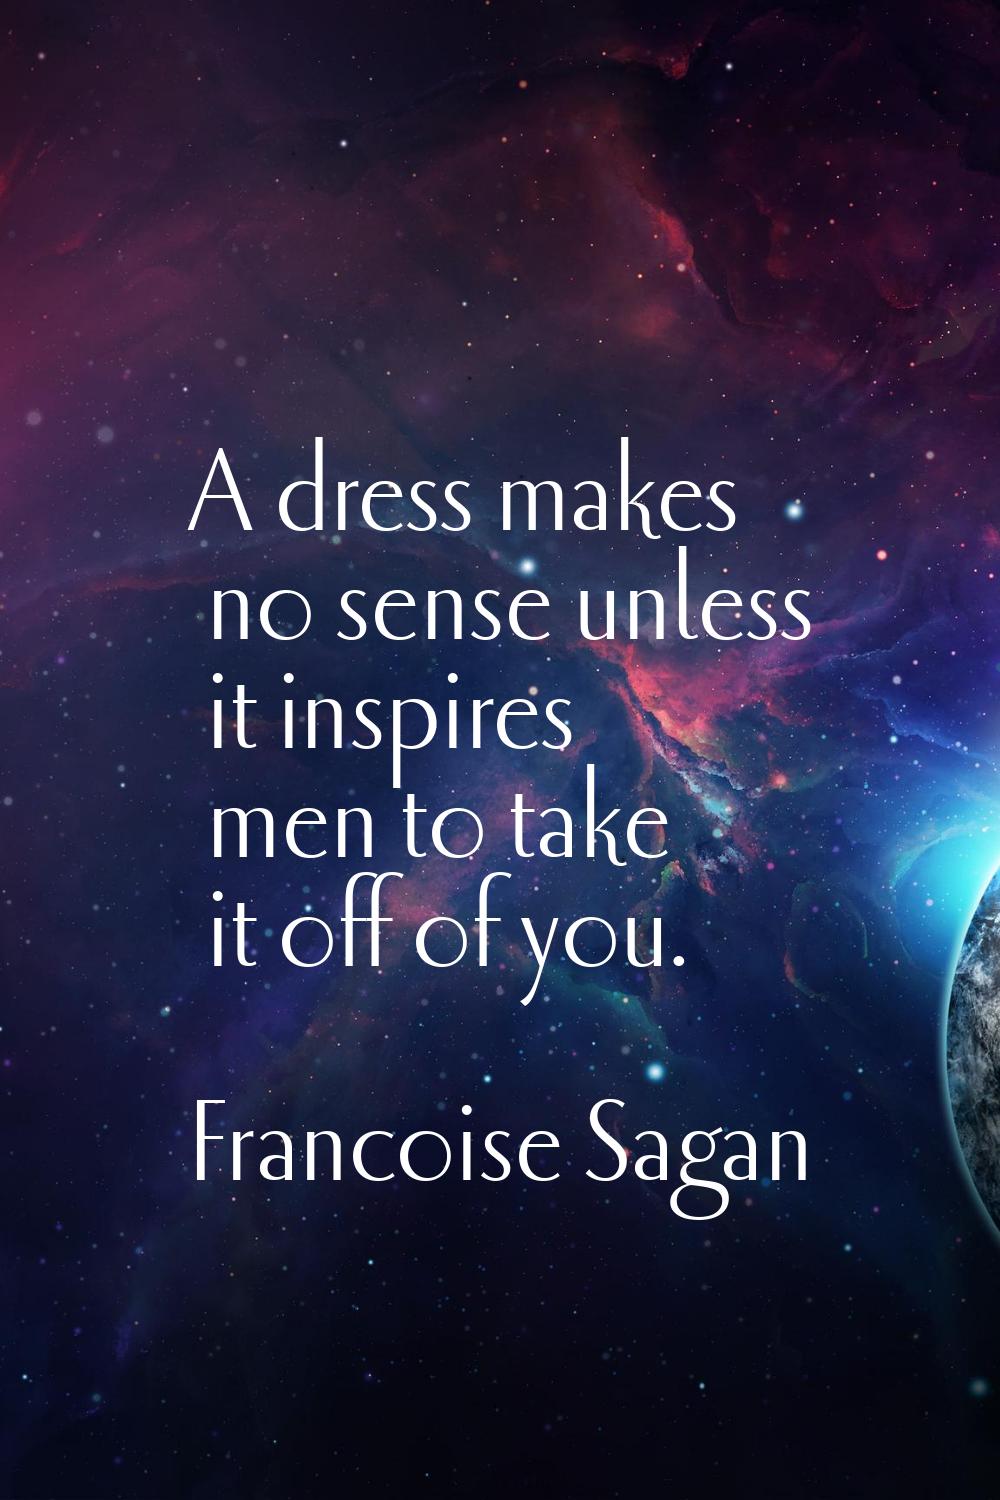 A dress makes no sense unless it inspires men to take it off of you.